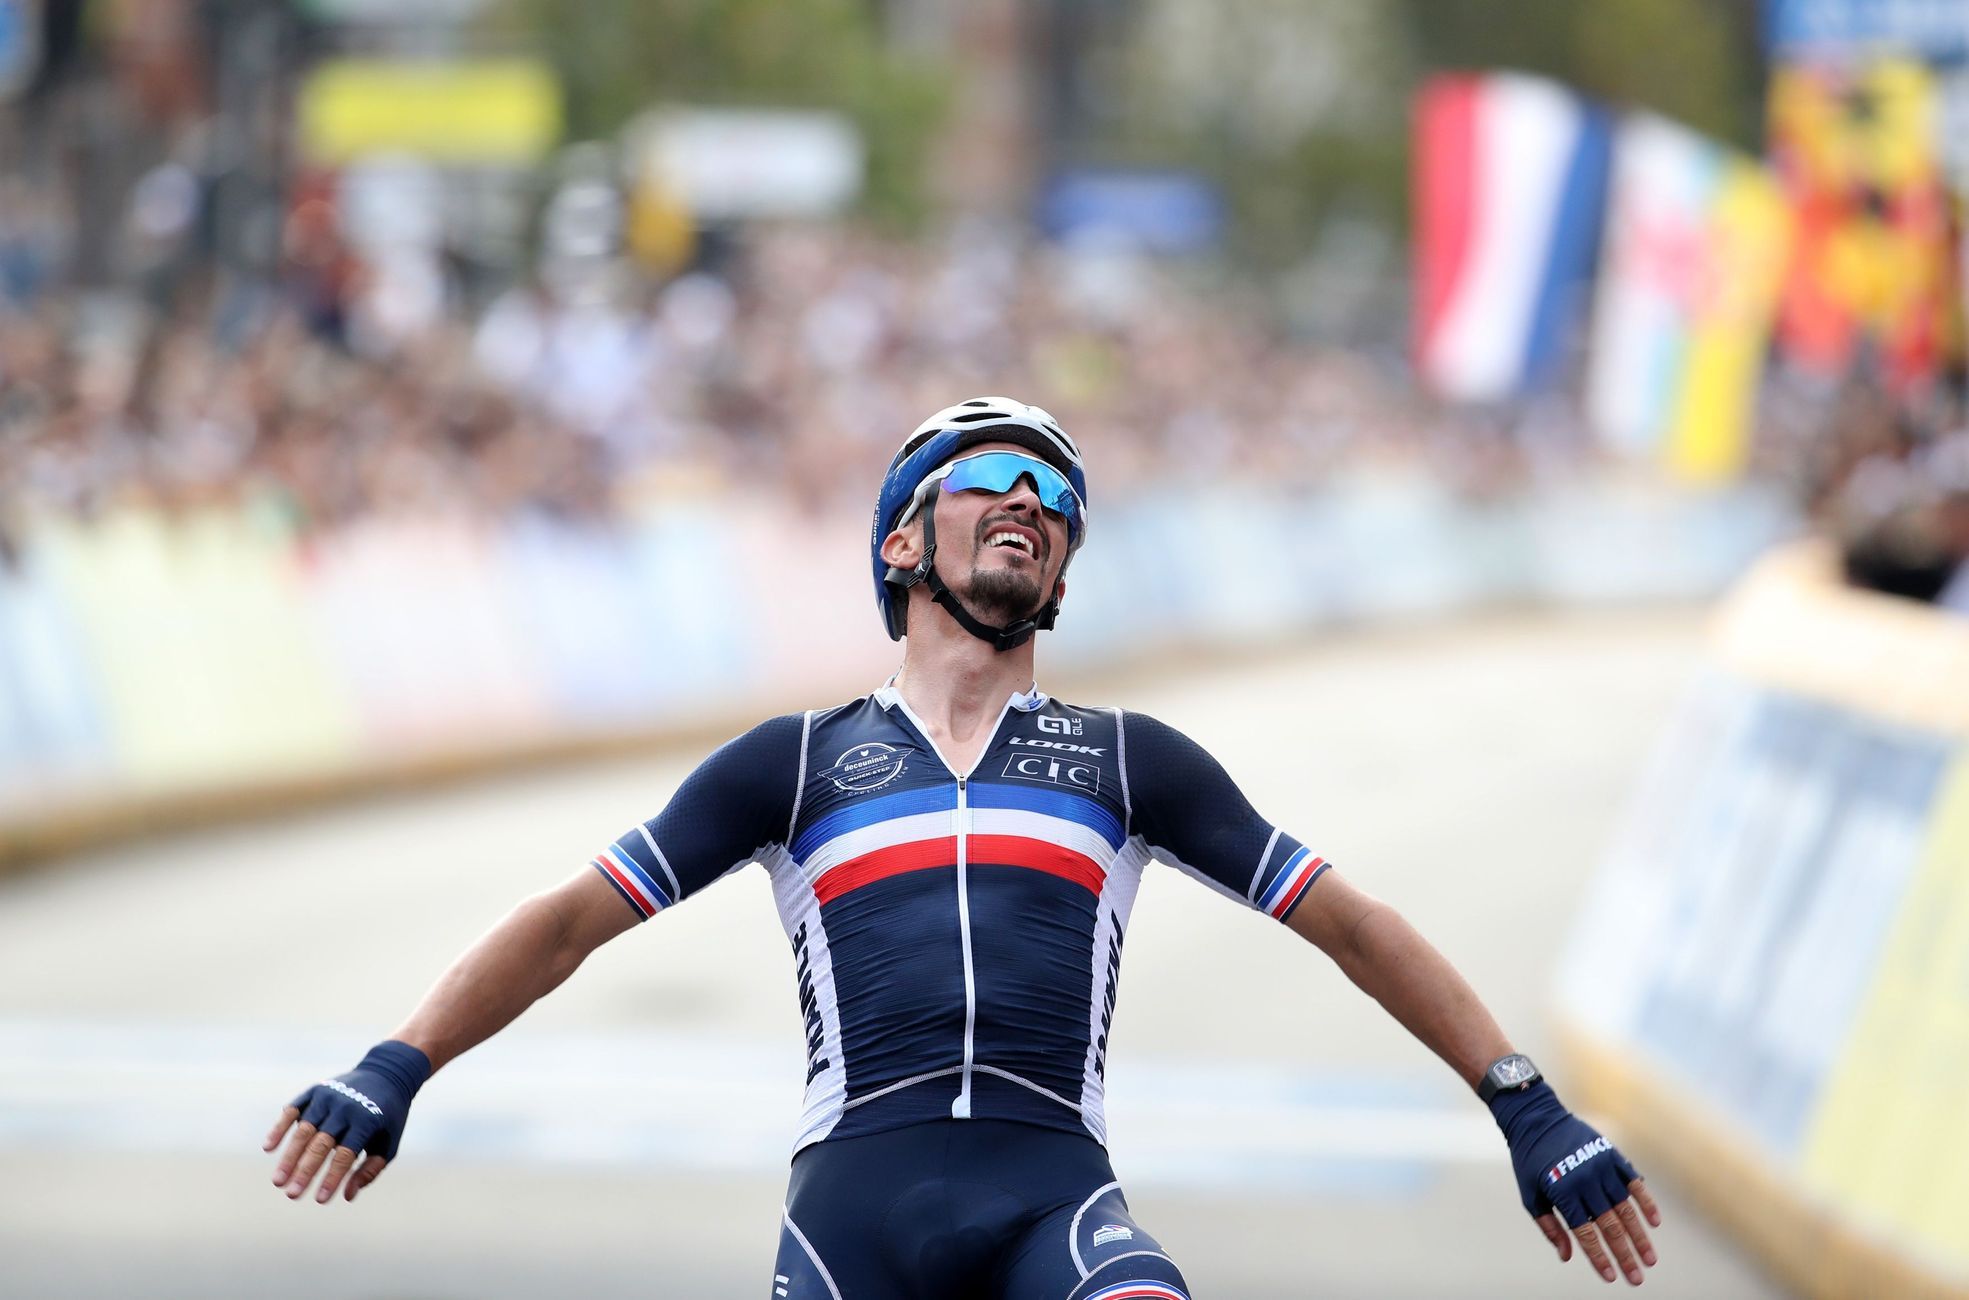 Frenchman Alaphilippe is once again cycling world champion, Štybar finished seventh